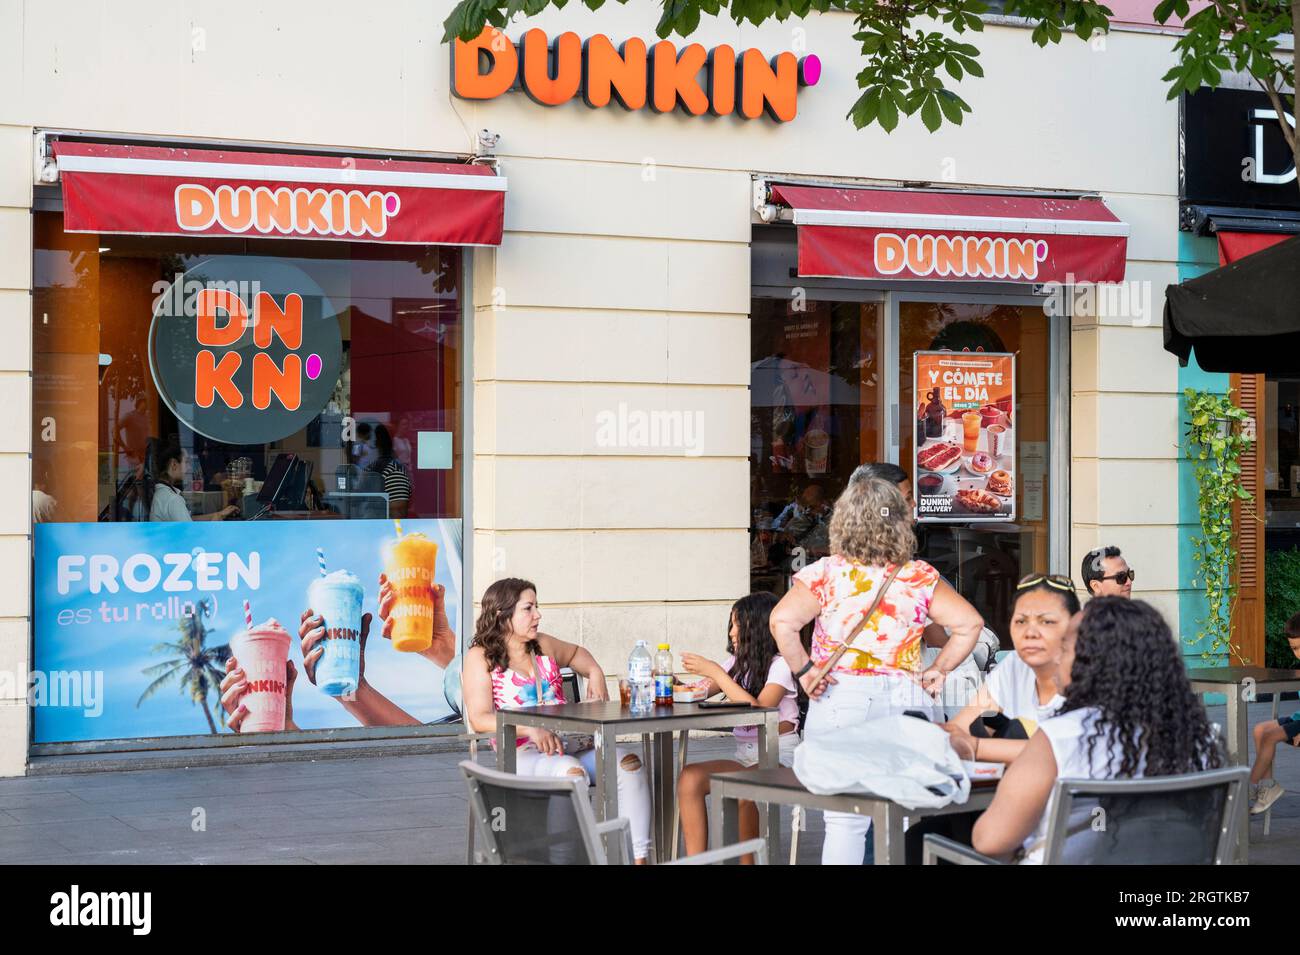 Customers are seen eating at the American multinational coffee and snack  chain Dunkin' Donuts in Spain Stock Photo - Alamy